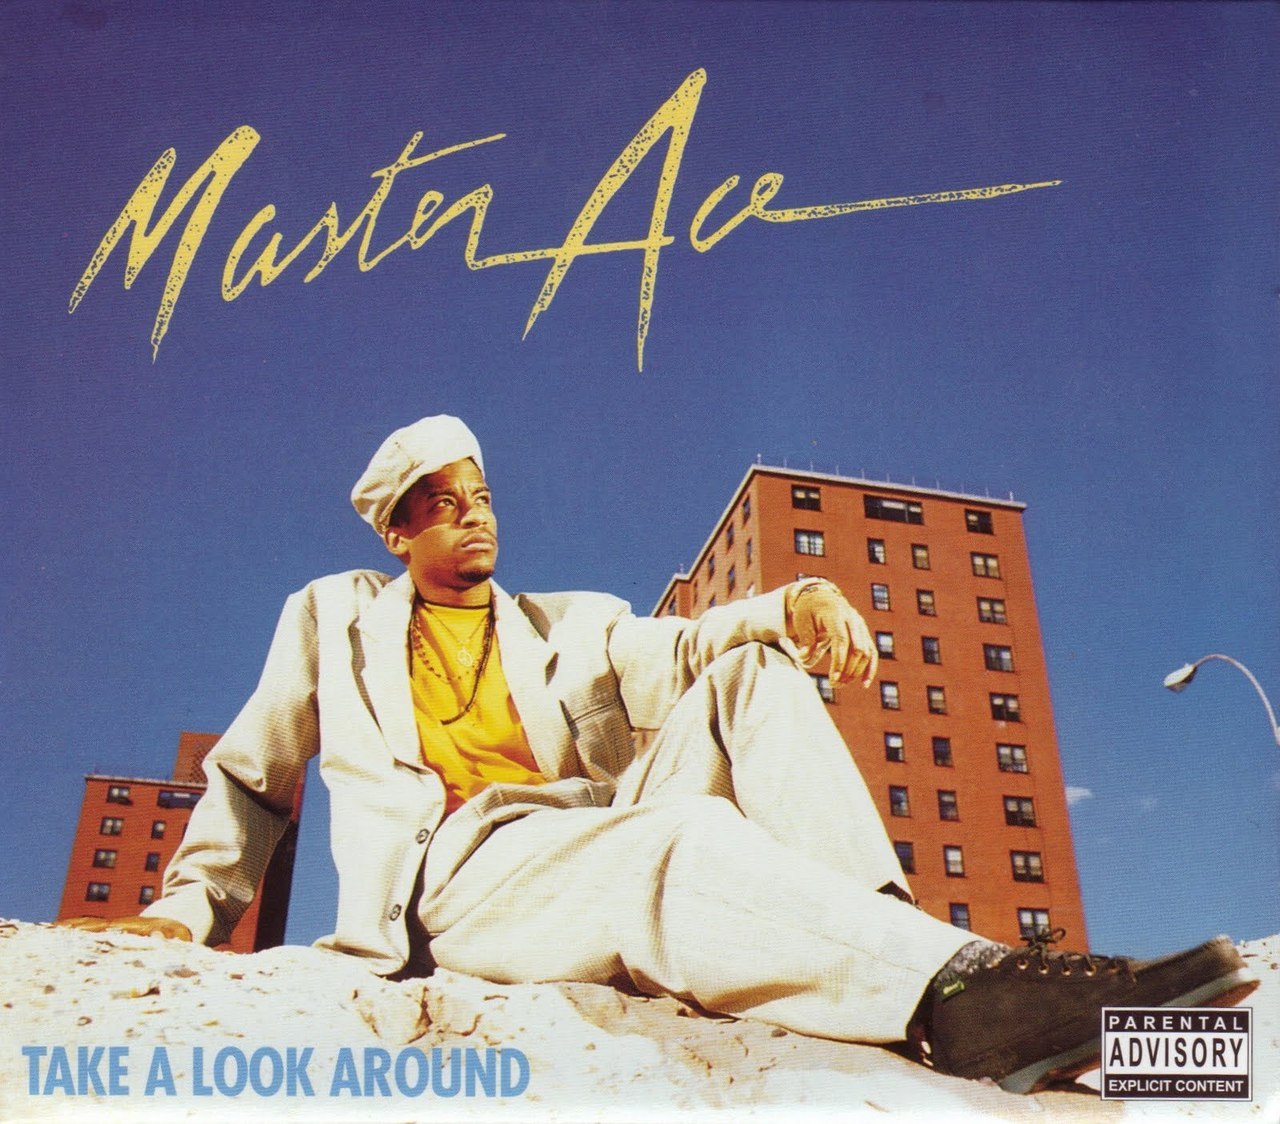 On this day in 1990, Master Ace released his debut album, Take A Look Around.